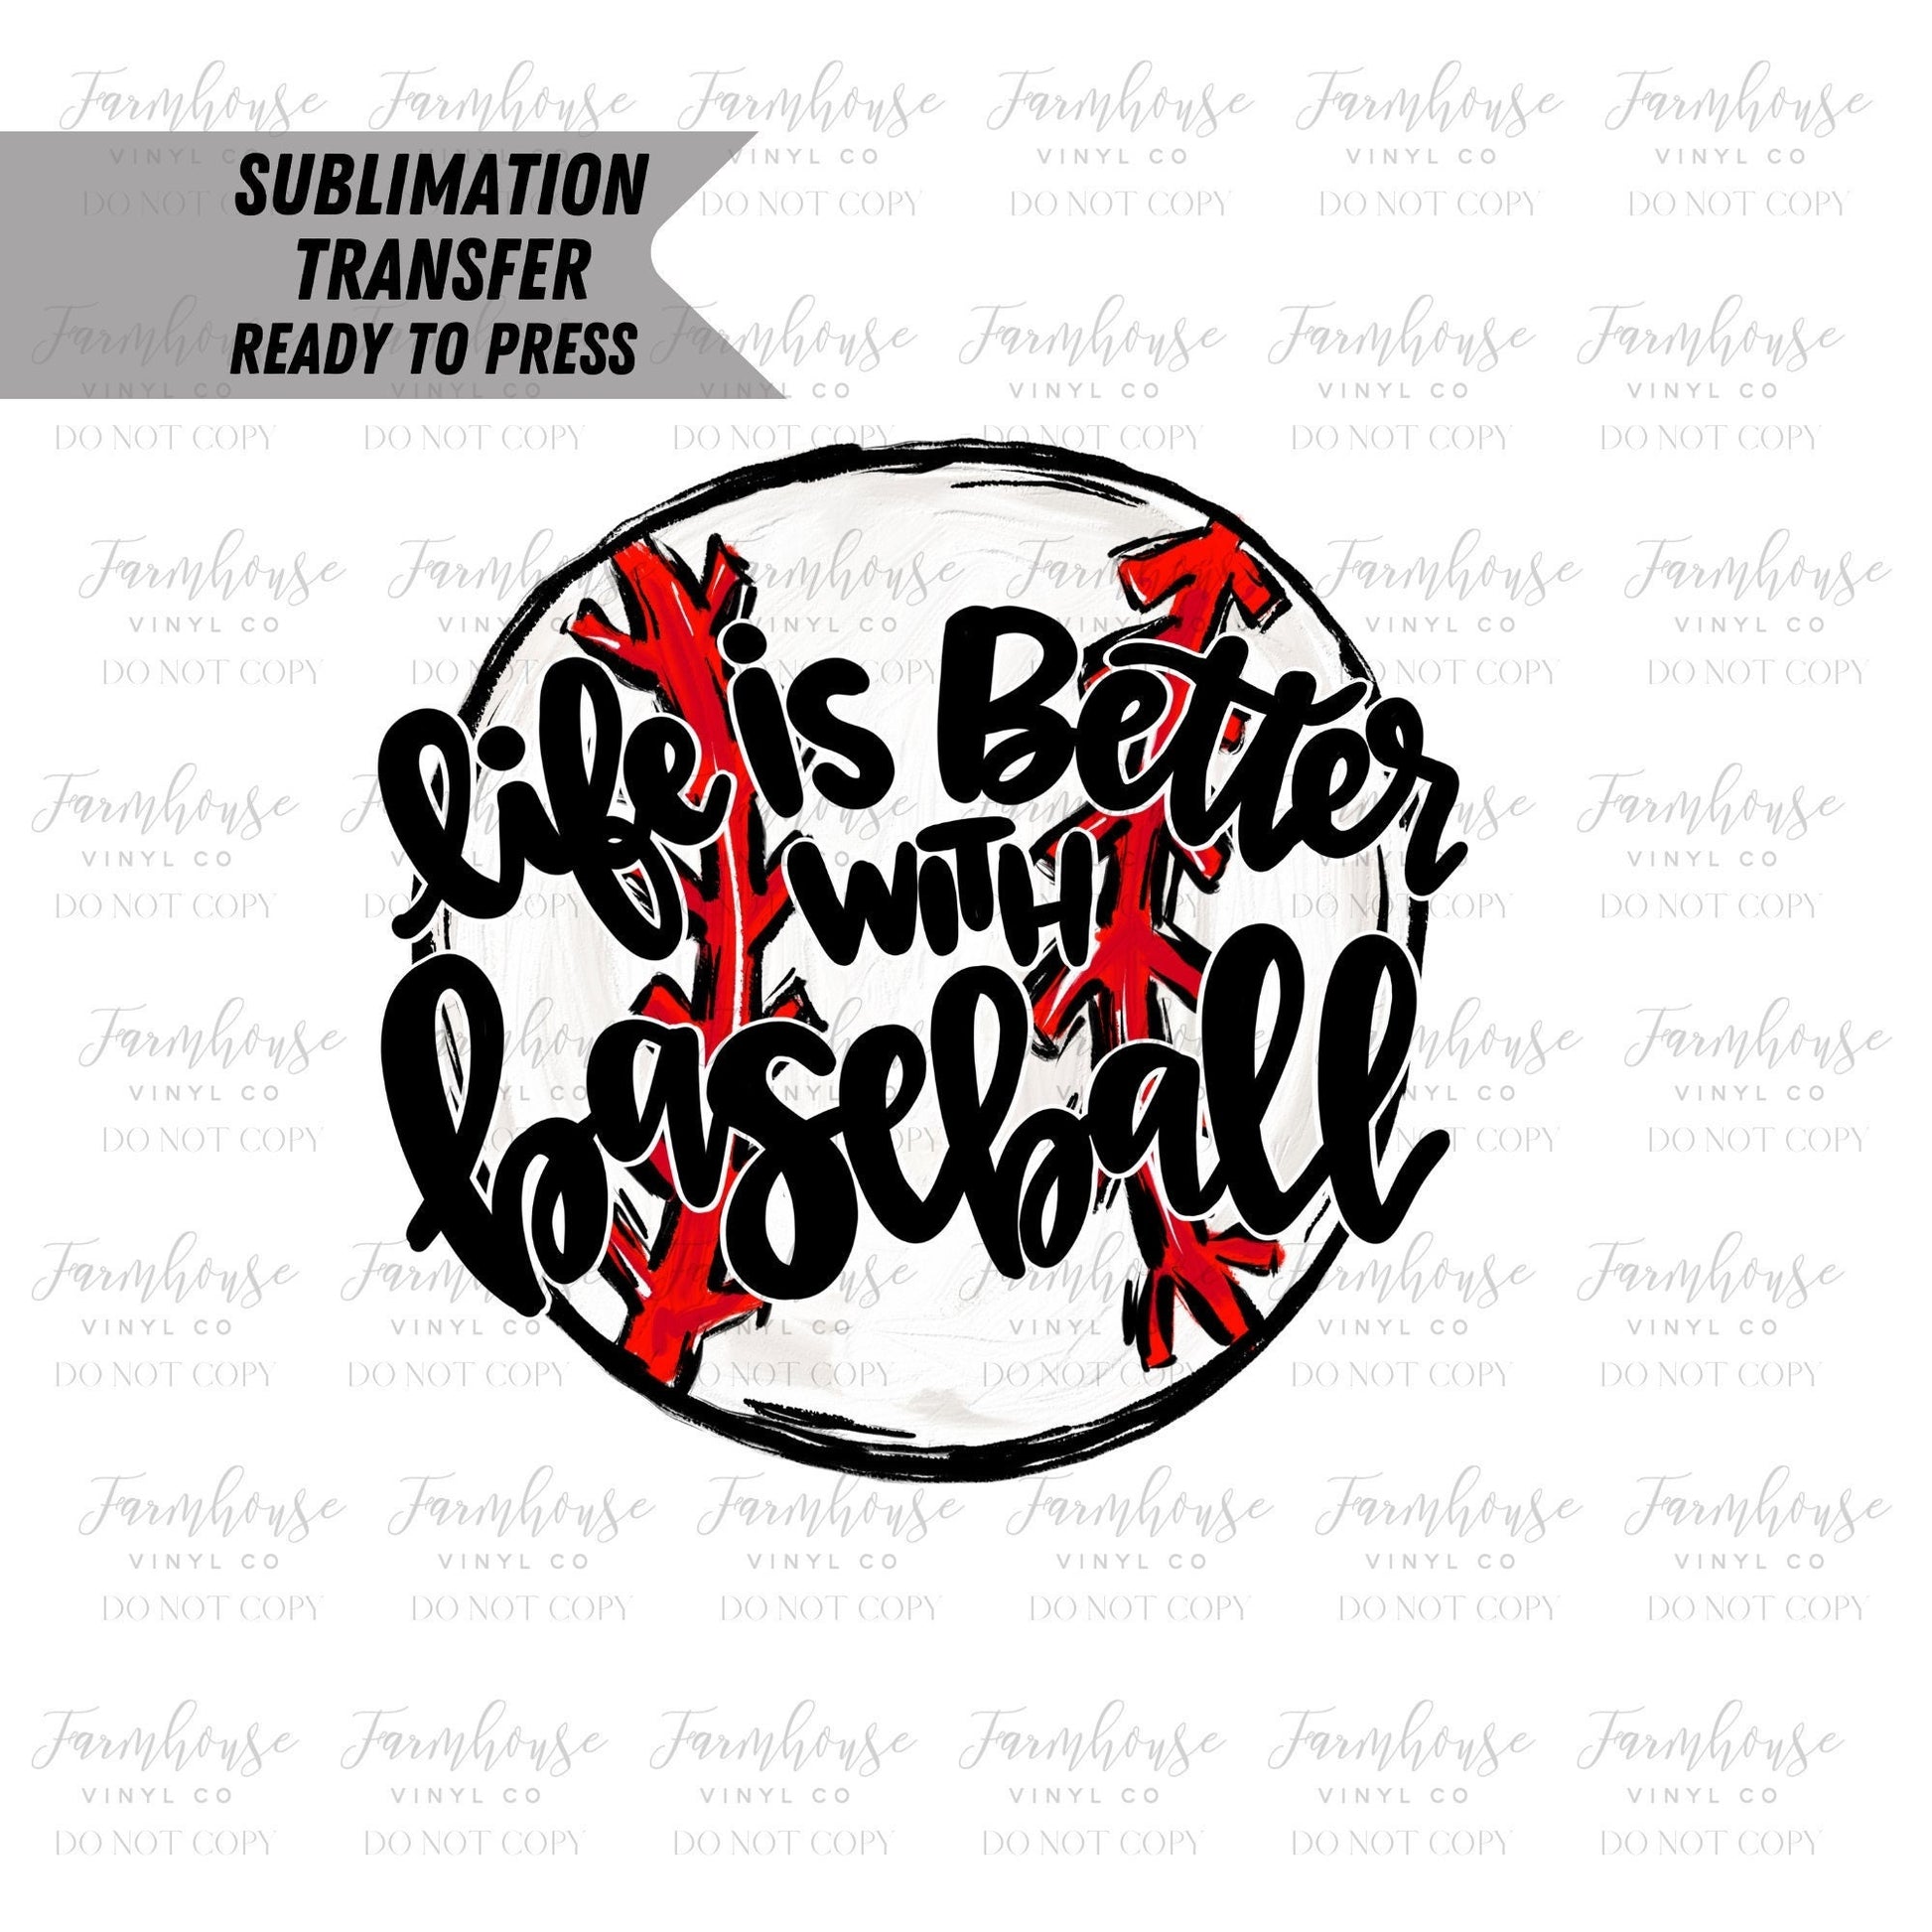 Life is Better with Baseball, Baseball Mom,Ready To Press, Sublimation Transfers, Sublimation, Transfer Ready To Press, Heat Transfer Design - Farmhouse Vinyl Co